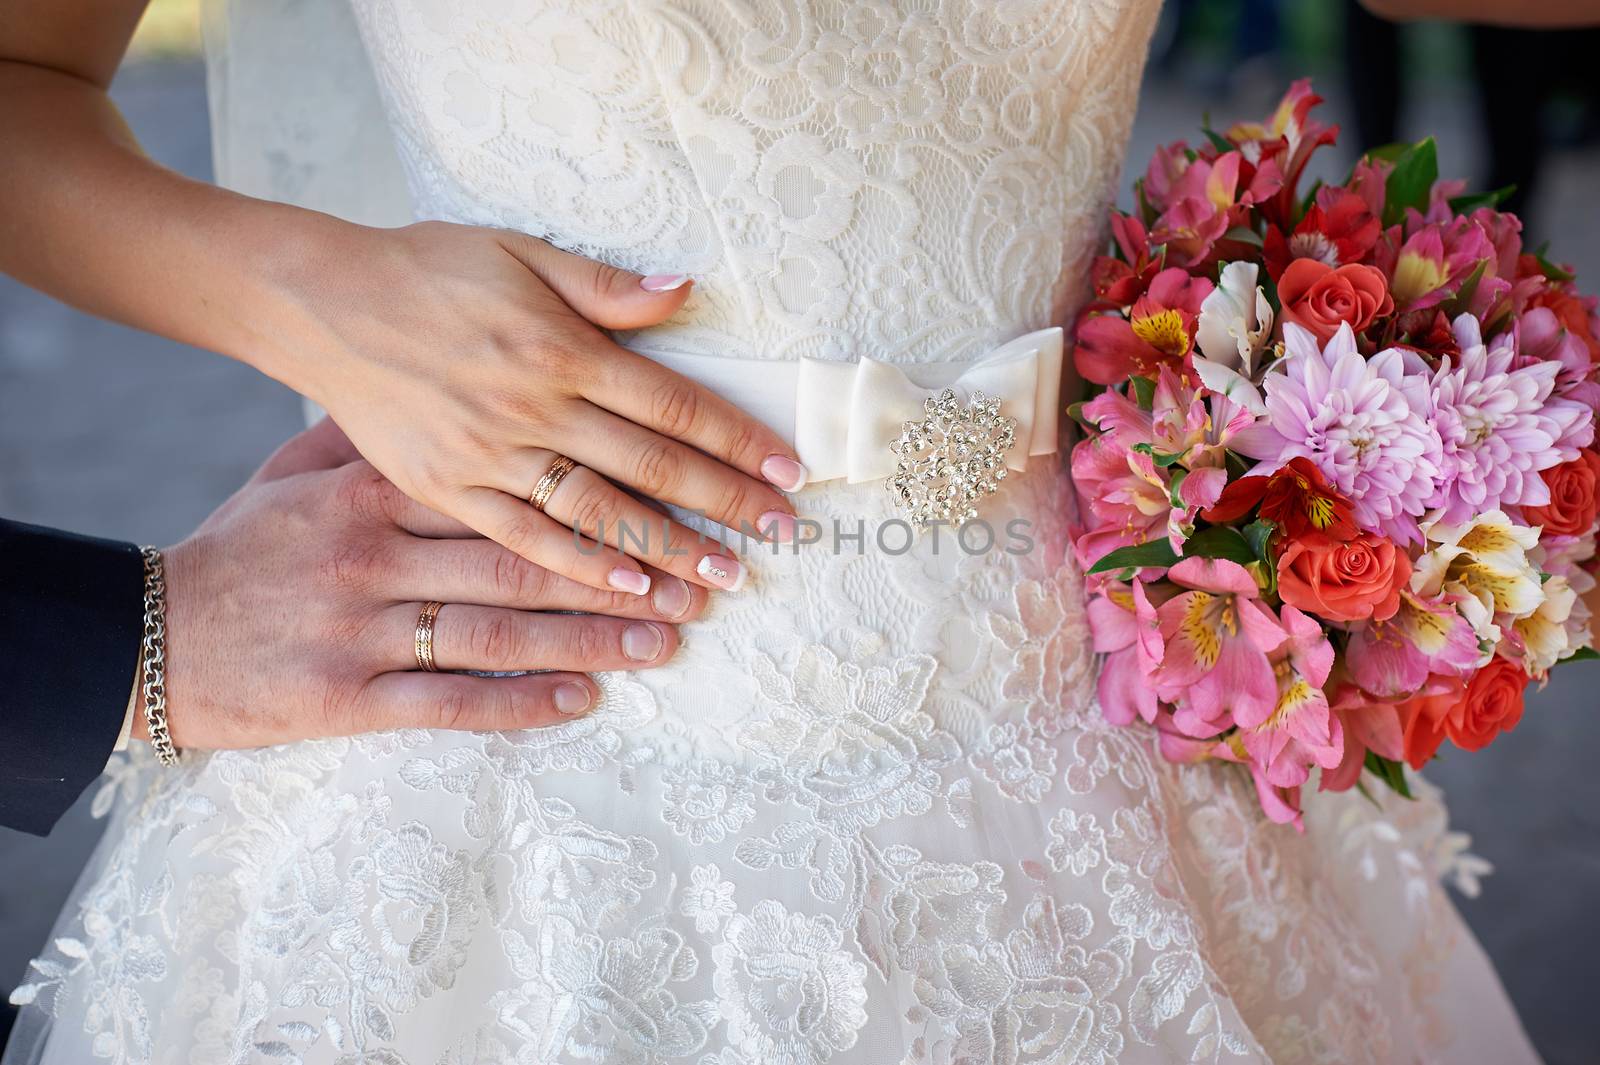 hands of the bride and groom with rings and wedding bouquet.